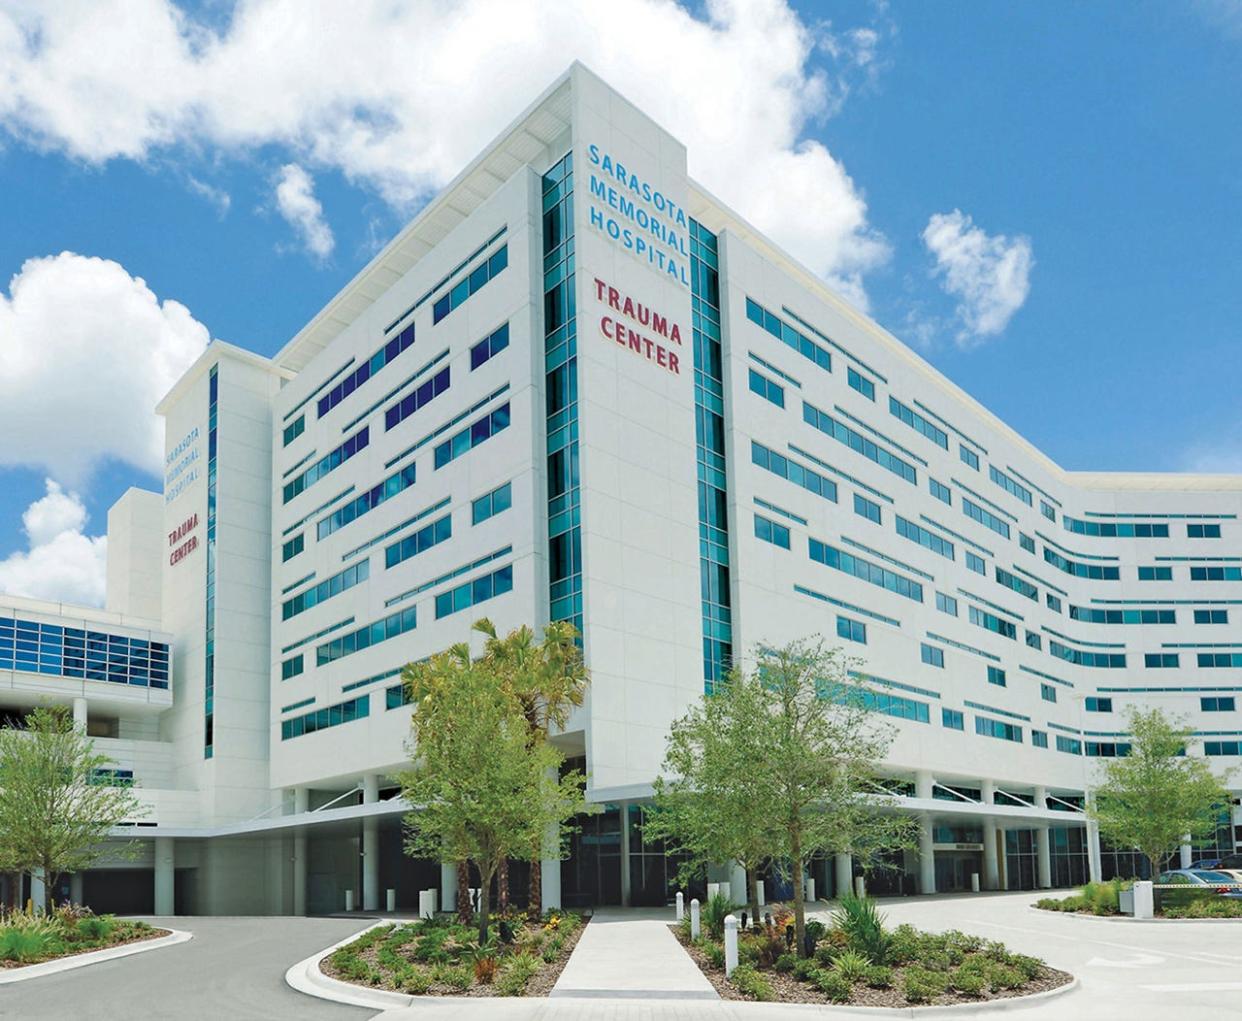 Sarasota Memorial Hospital was again ranked in Newsweek's list of the world’s best hospitals. The Sarasota campus maintained its status as No. 4 in the state and improved to No. 131 in the U.S.